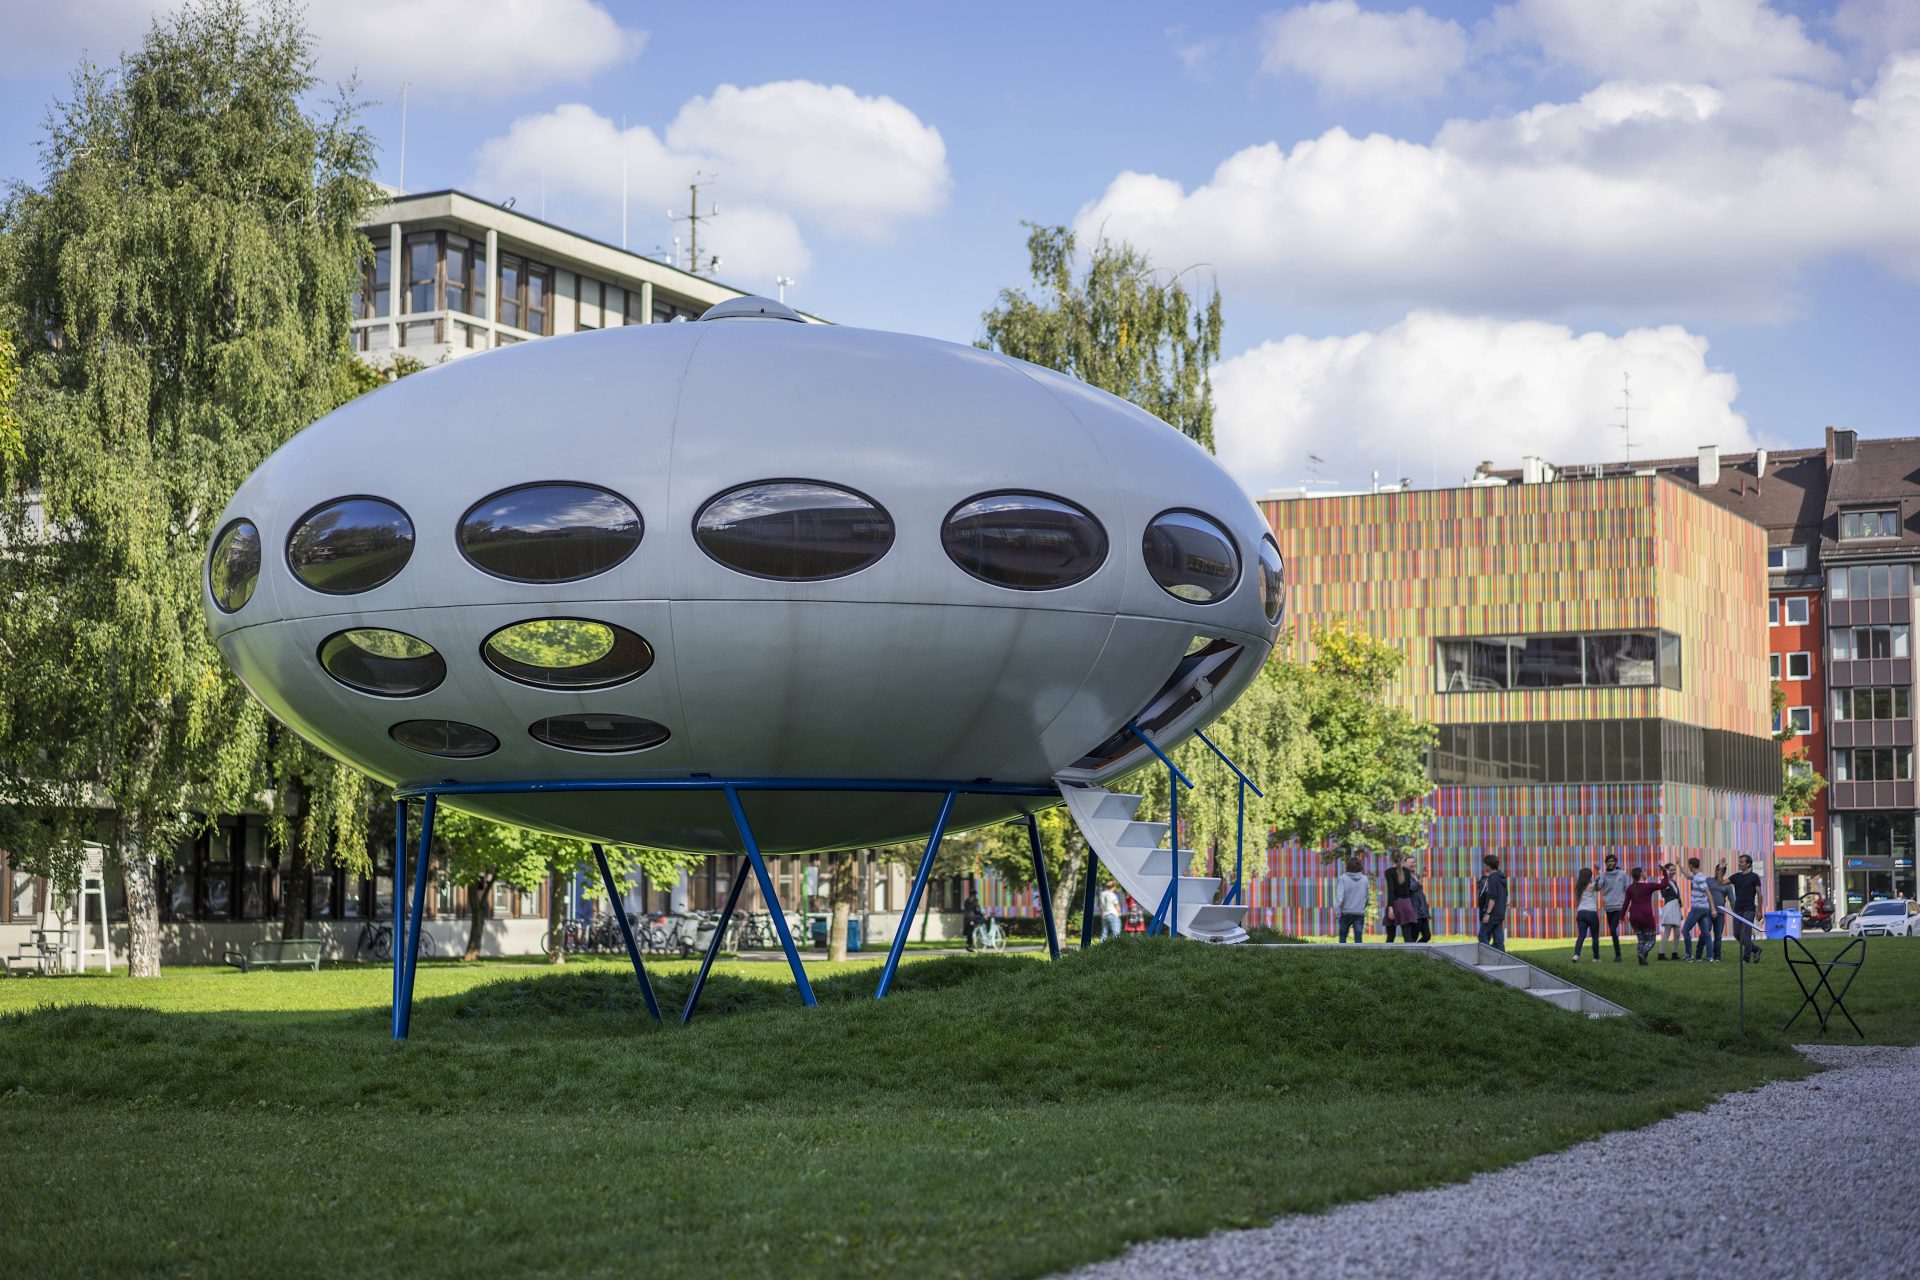 The picture shows the mobile home Futuro, which resembles a UFO. It stands on a meadow in front of the Pinakothek der Poderne. In the background you can see the square, colourful building of the Museum Brandhorst.